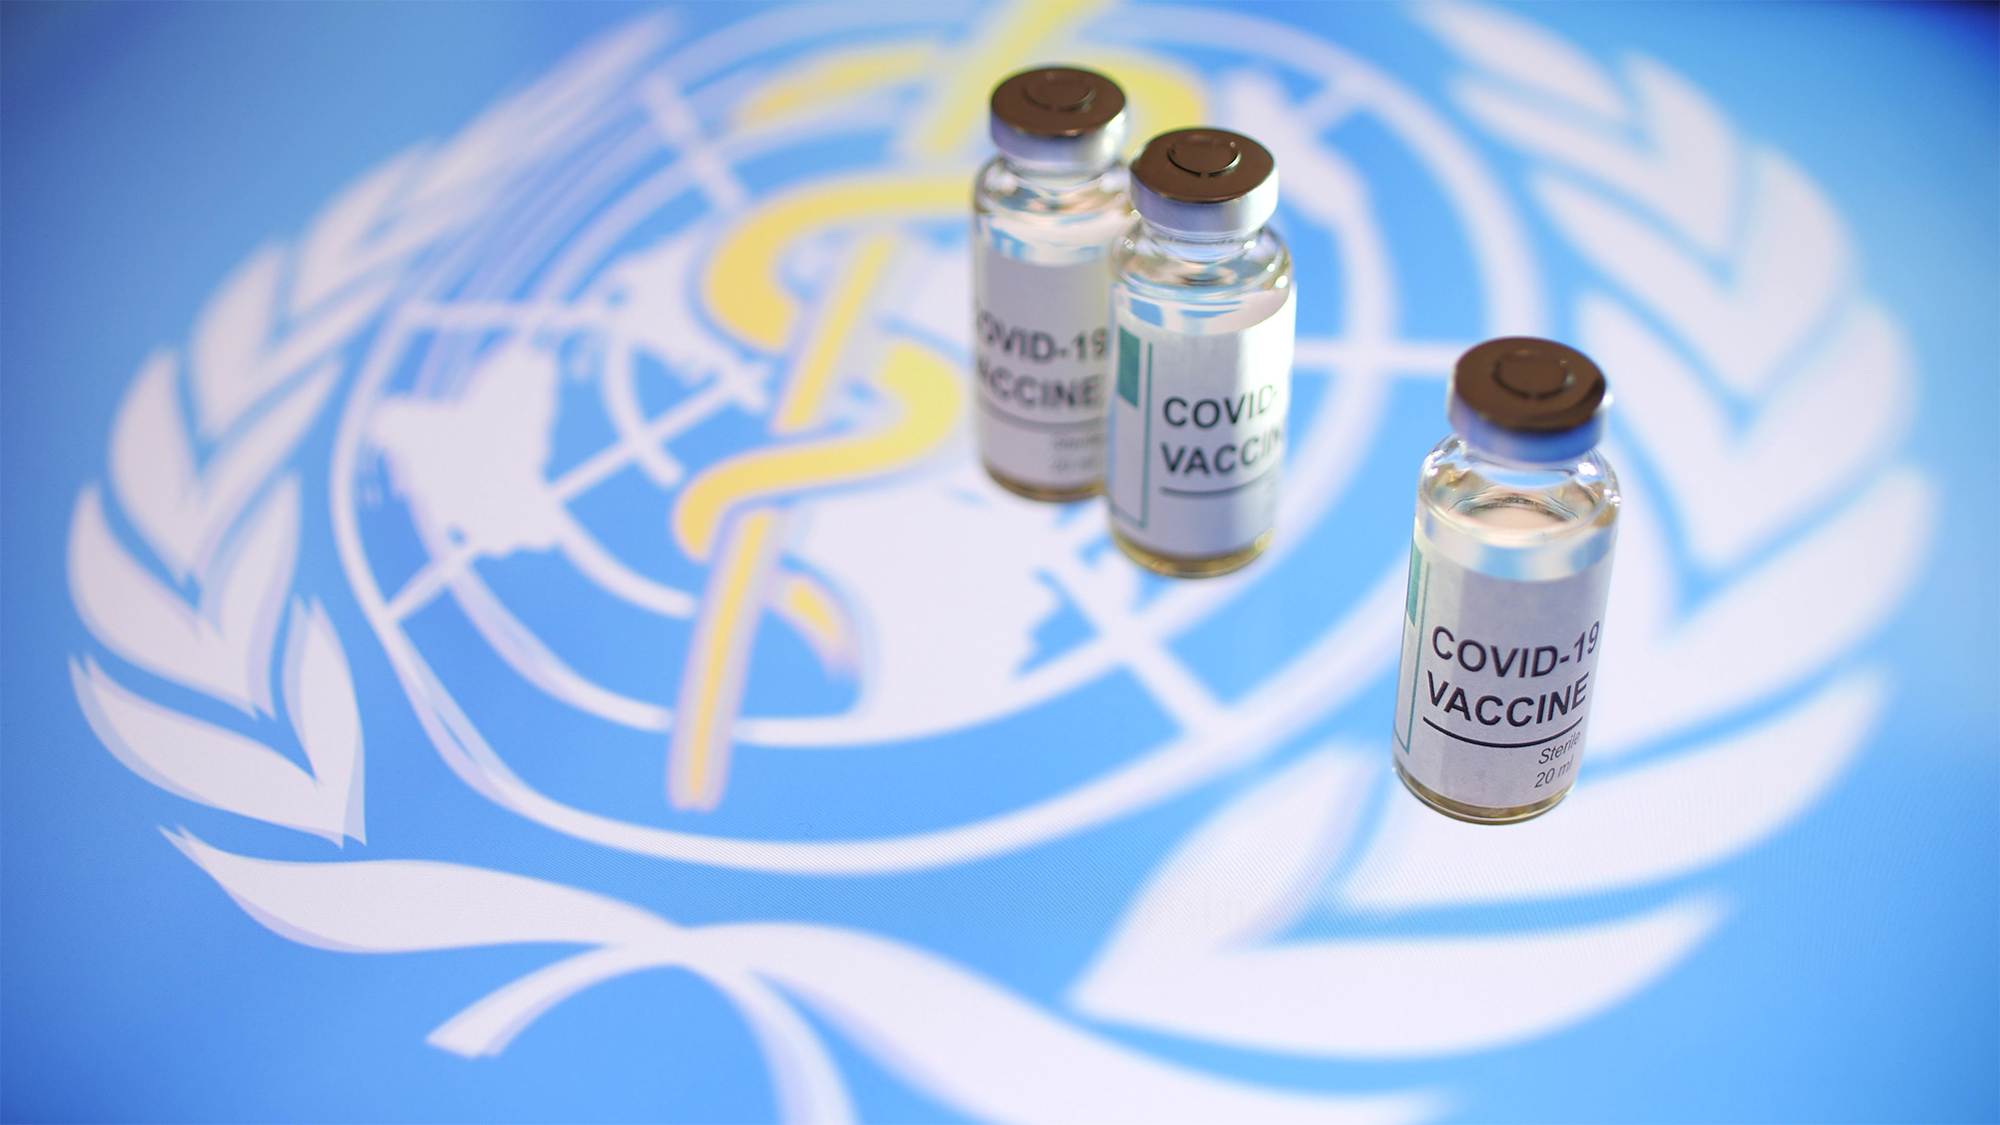 Three vials of COVID-19 vaccine in front of the World Health Organization's logo.